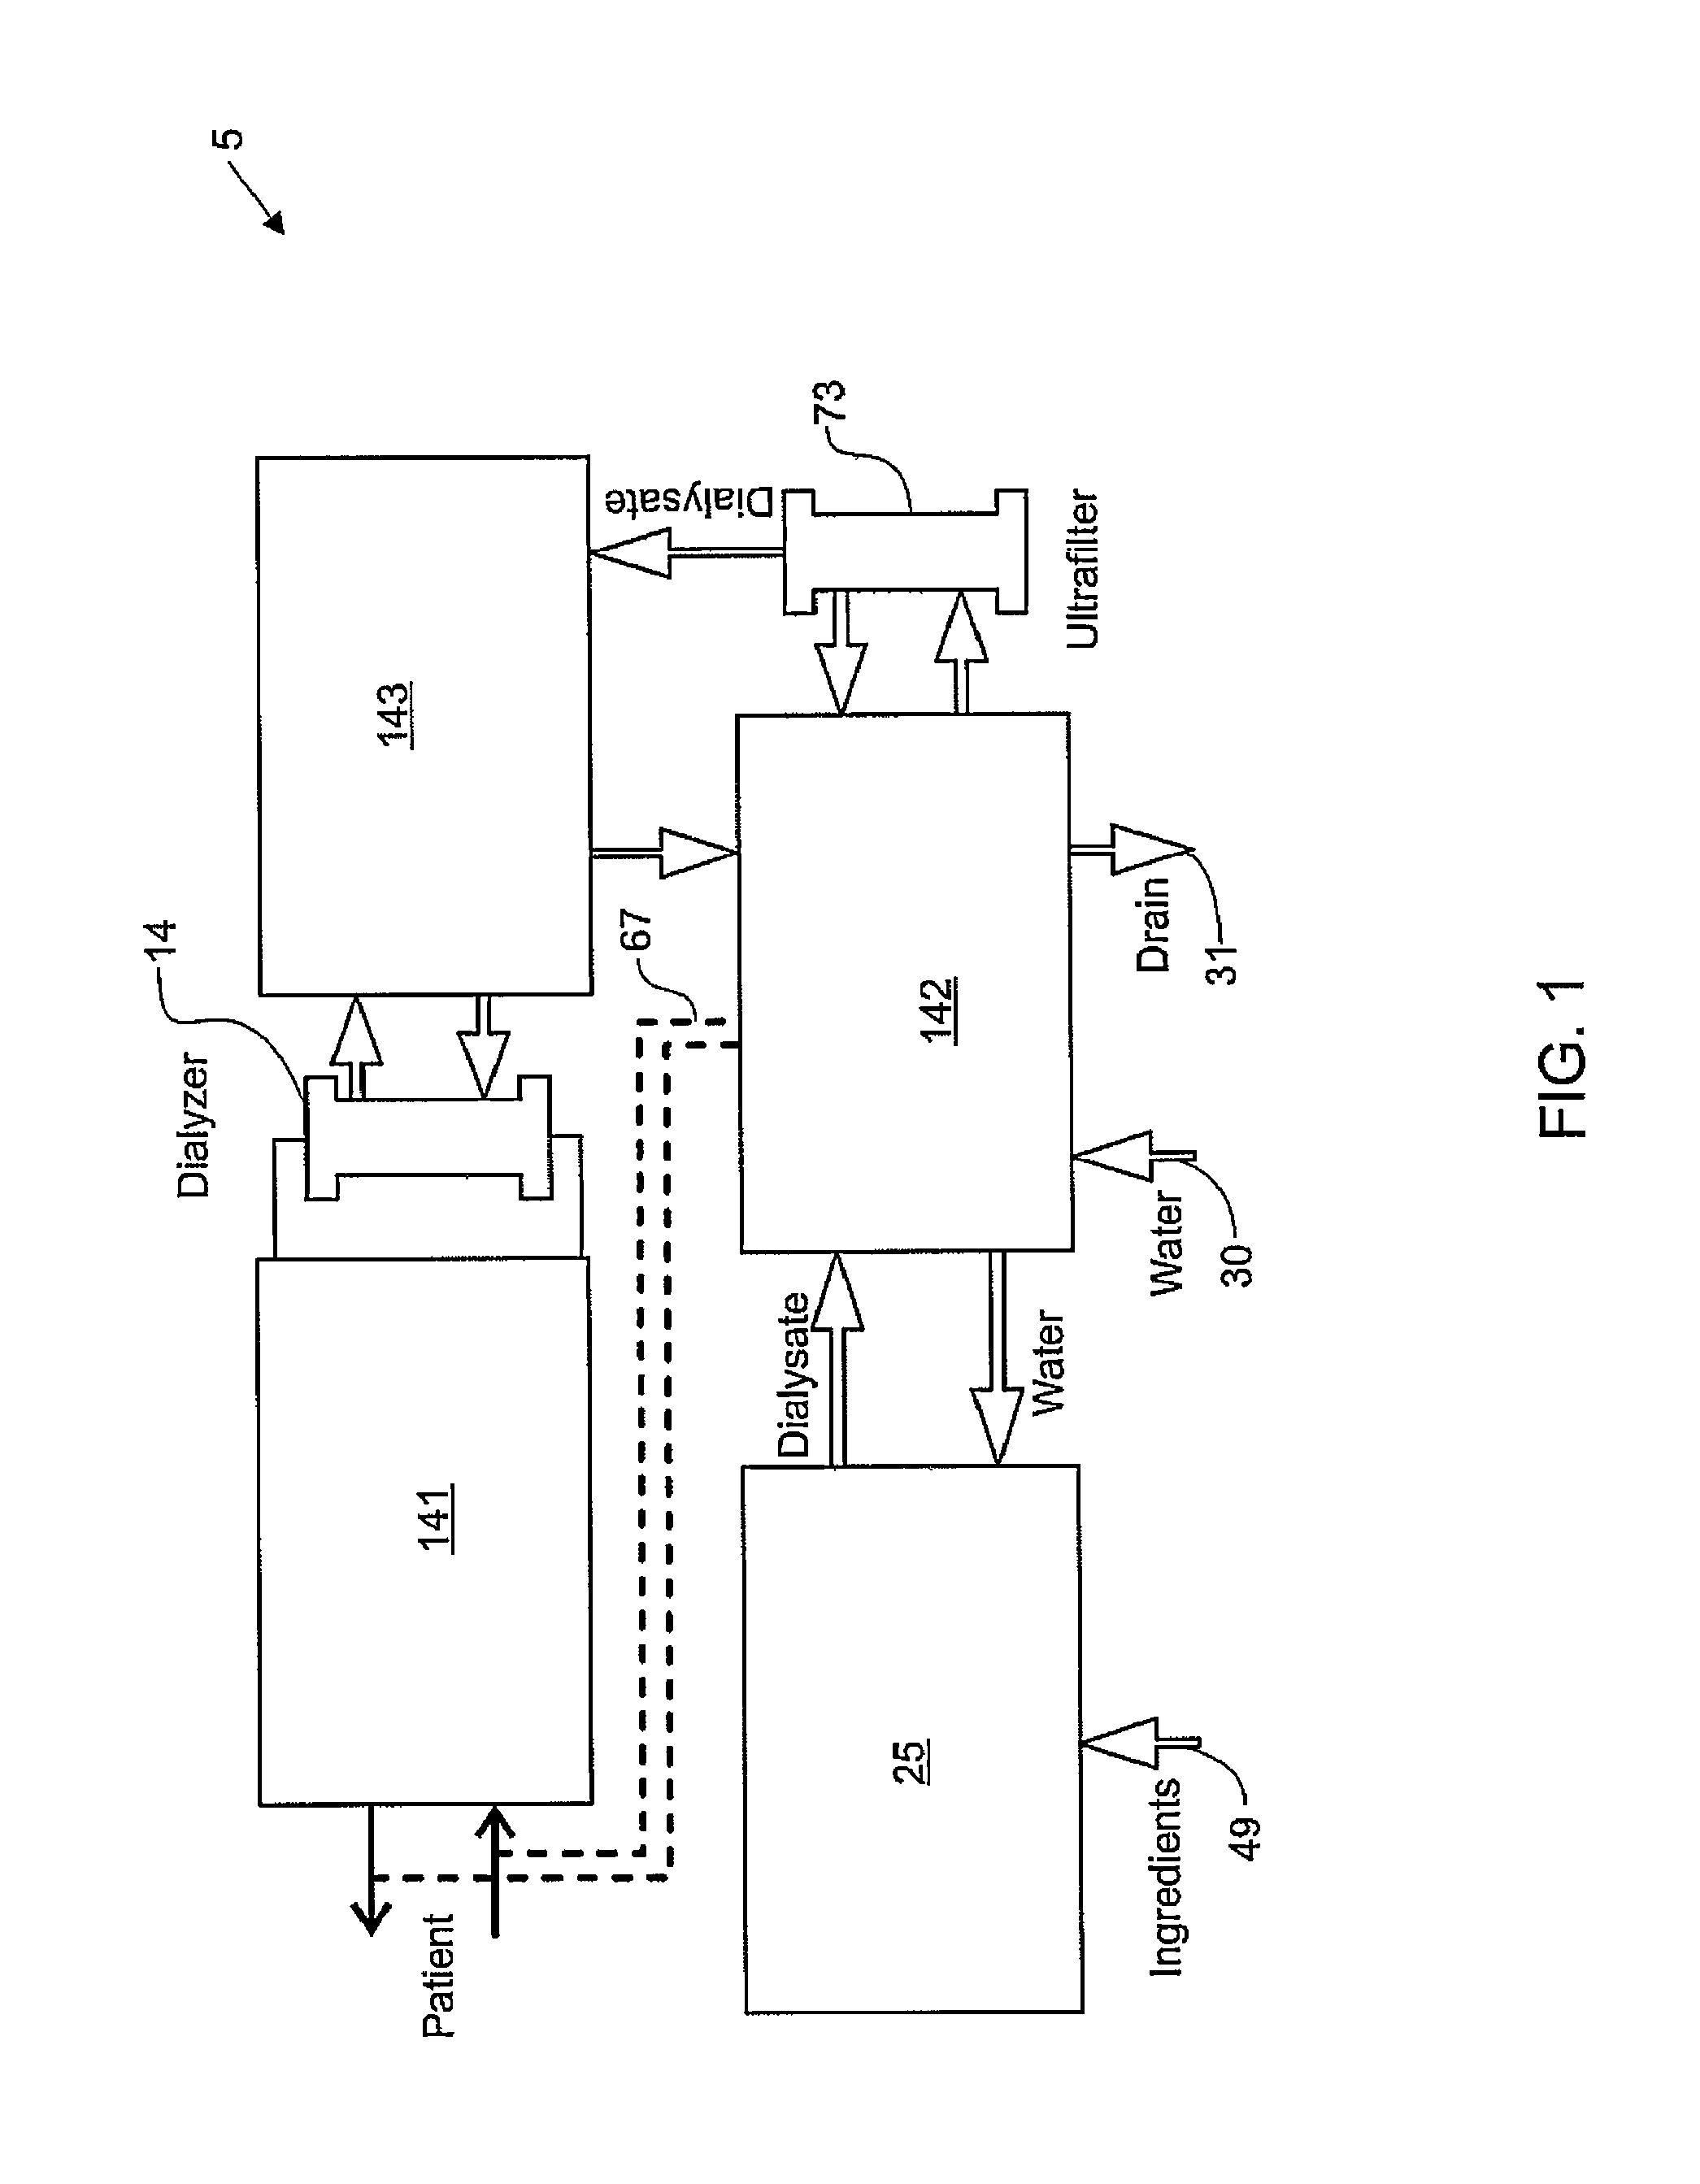 Blood circuit assembly for a hemodialysis system